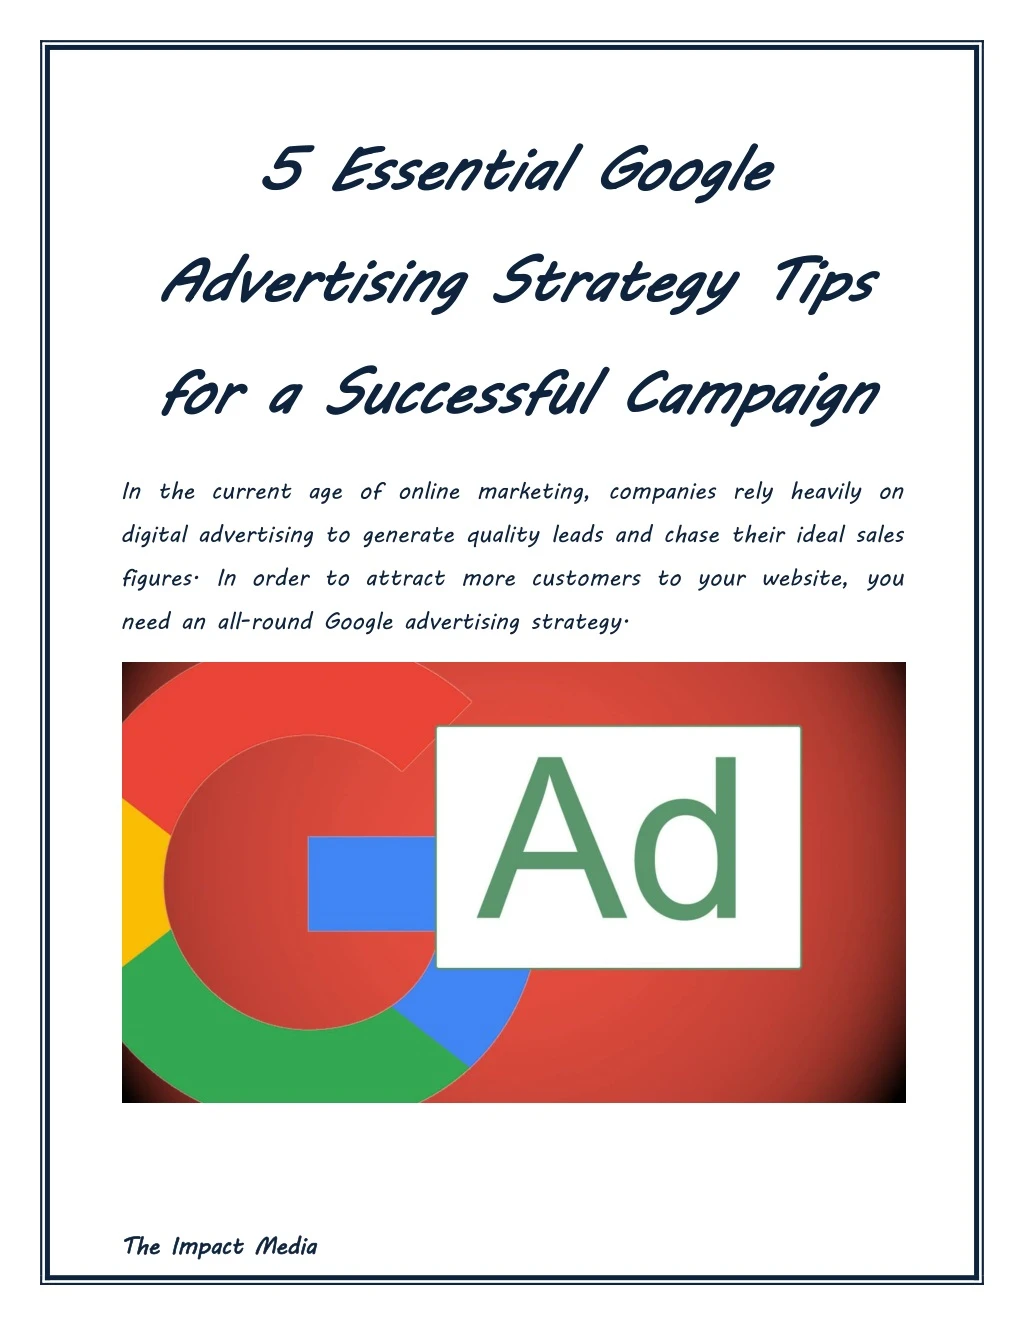 5 essential advertising strategy tips